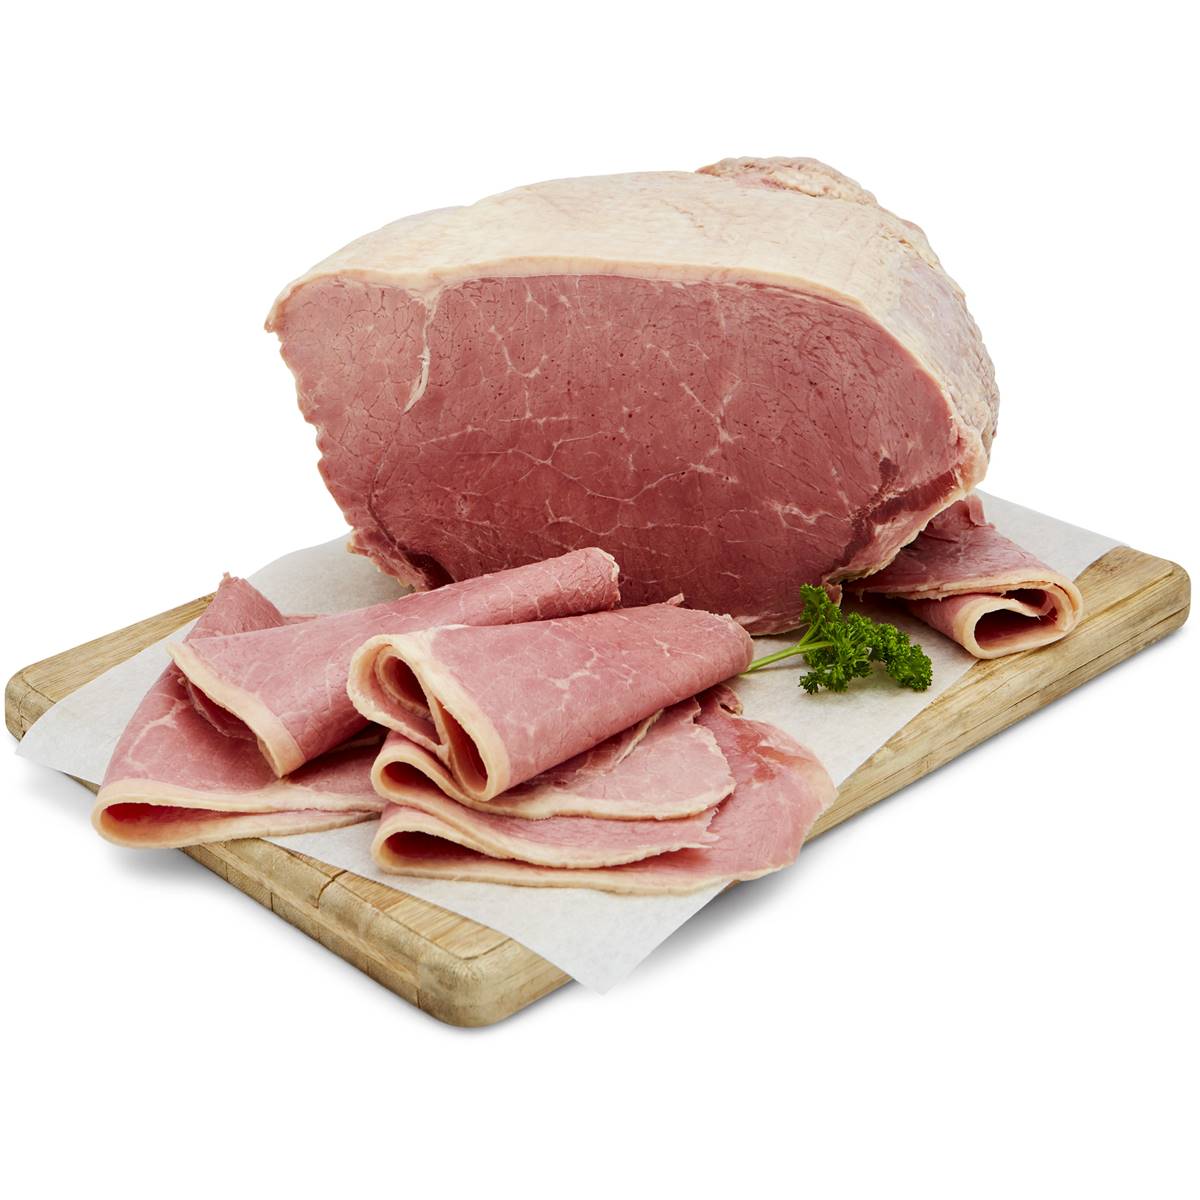 Calories in Woolworths Corned Beef Sliced From The Deli